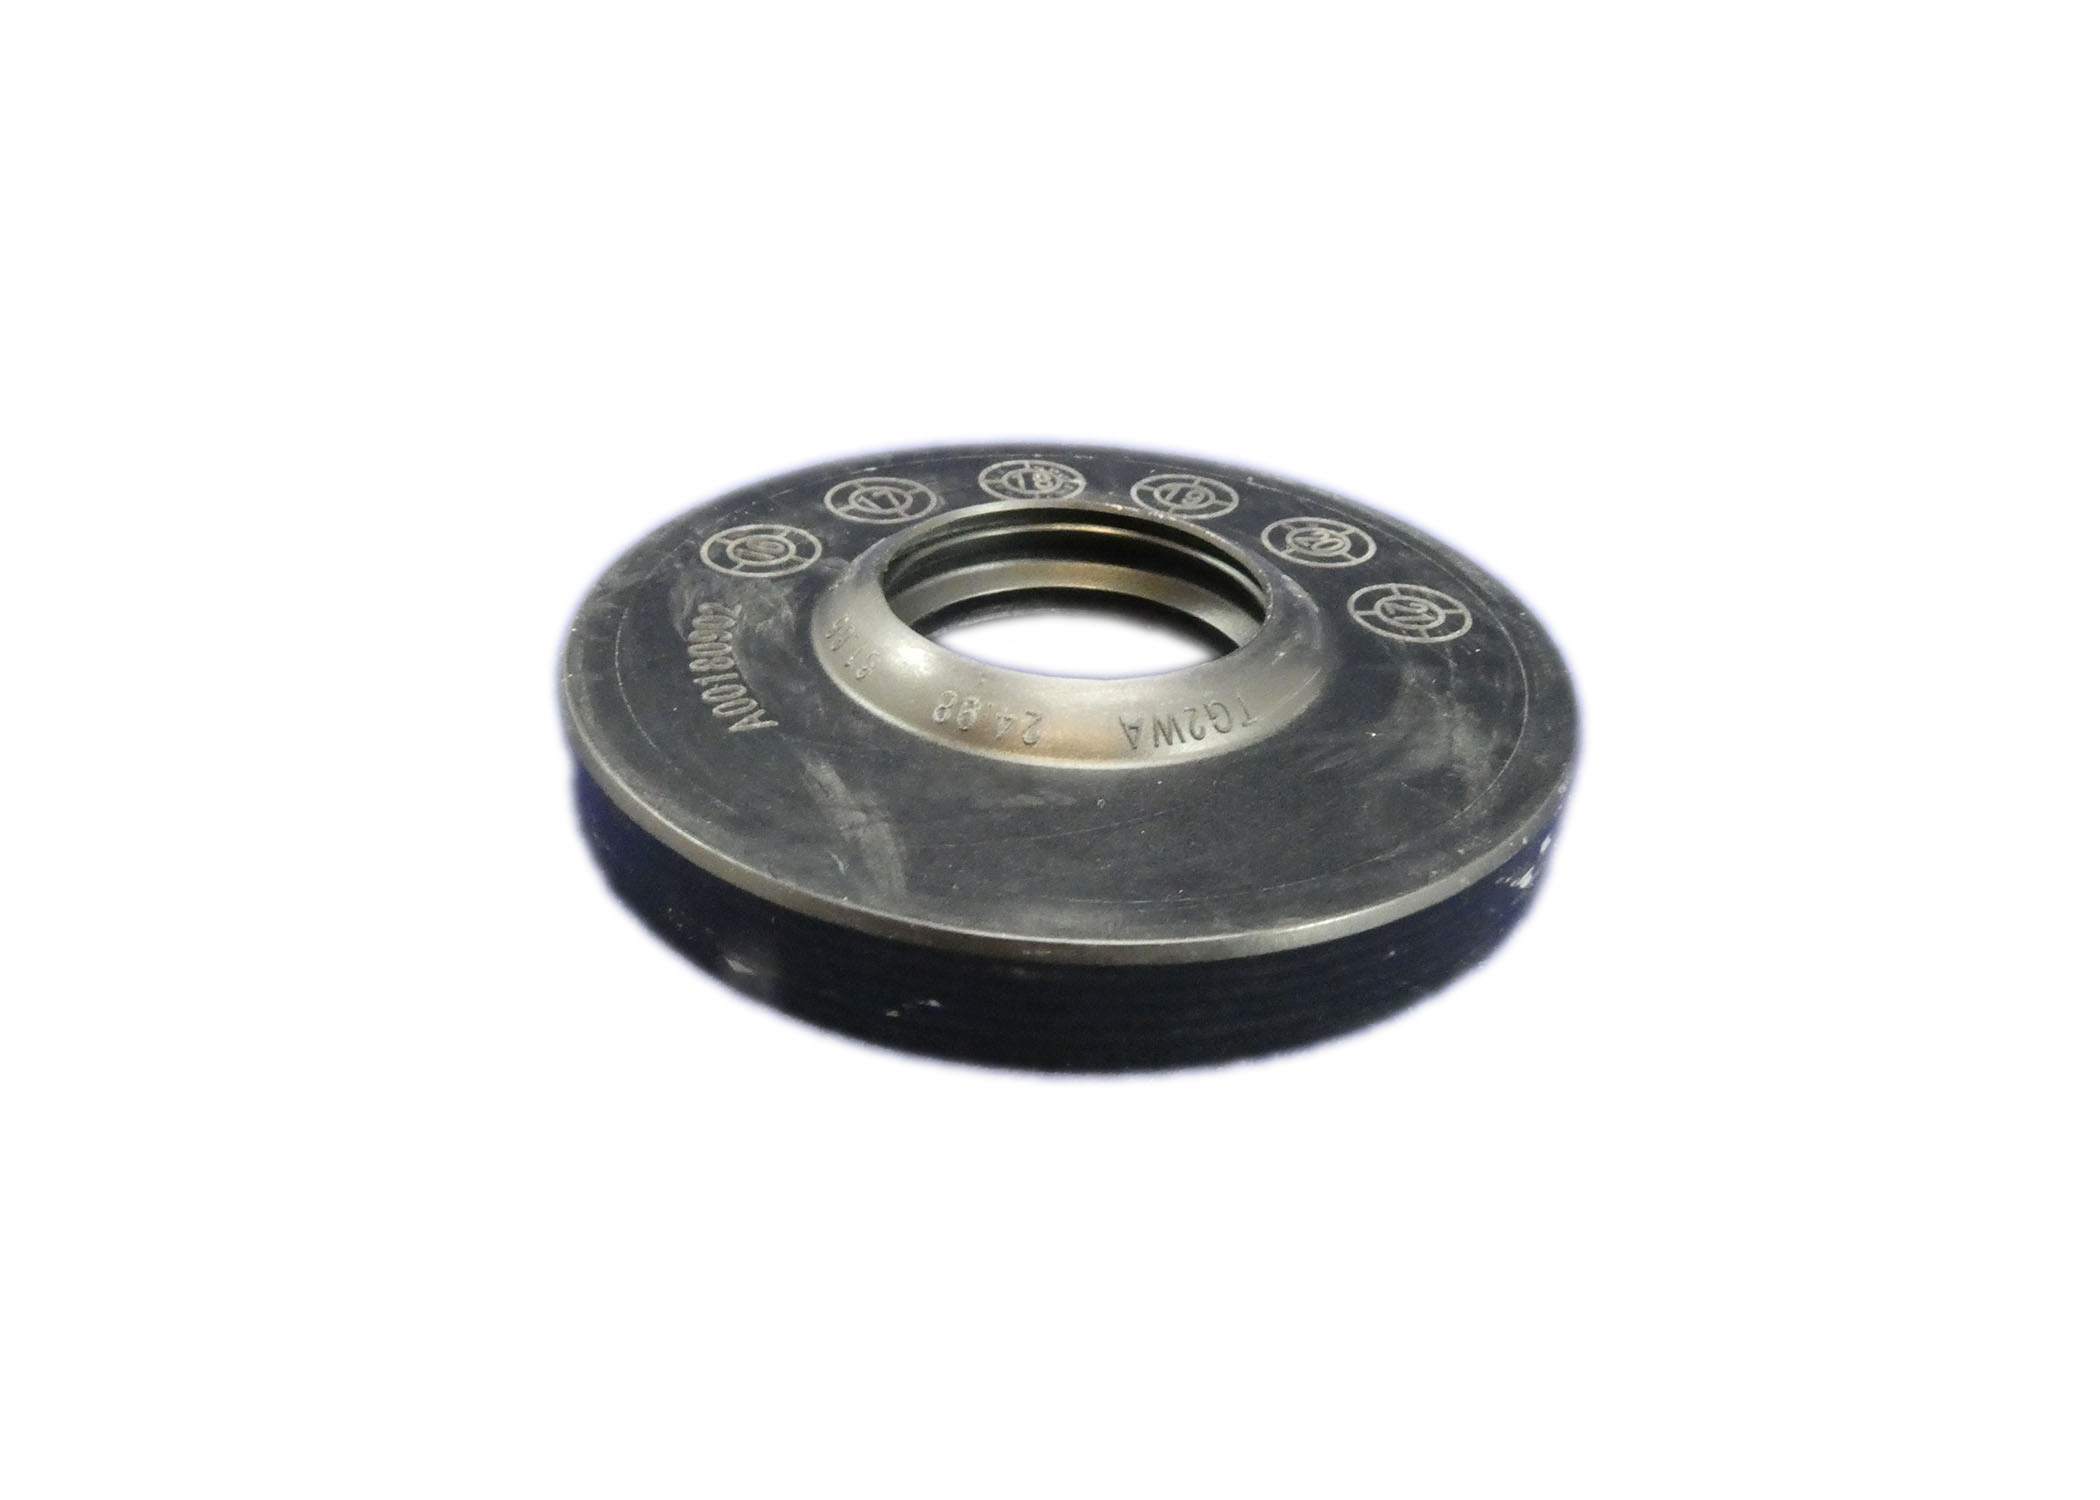 /globalassets/images/spares-images/a00180901_seal-outer-bowl_laundry_gaskets--seals.jpg